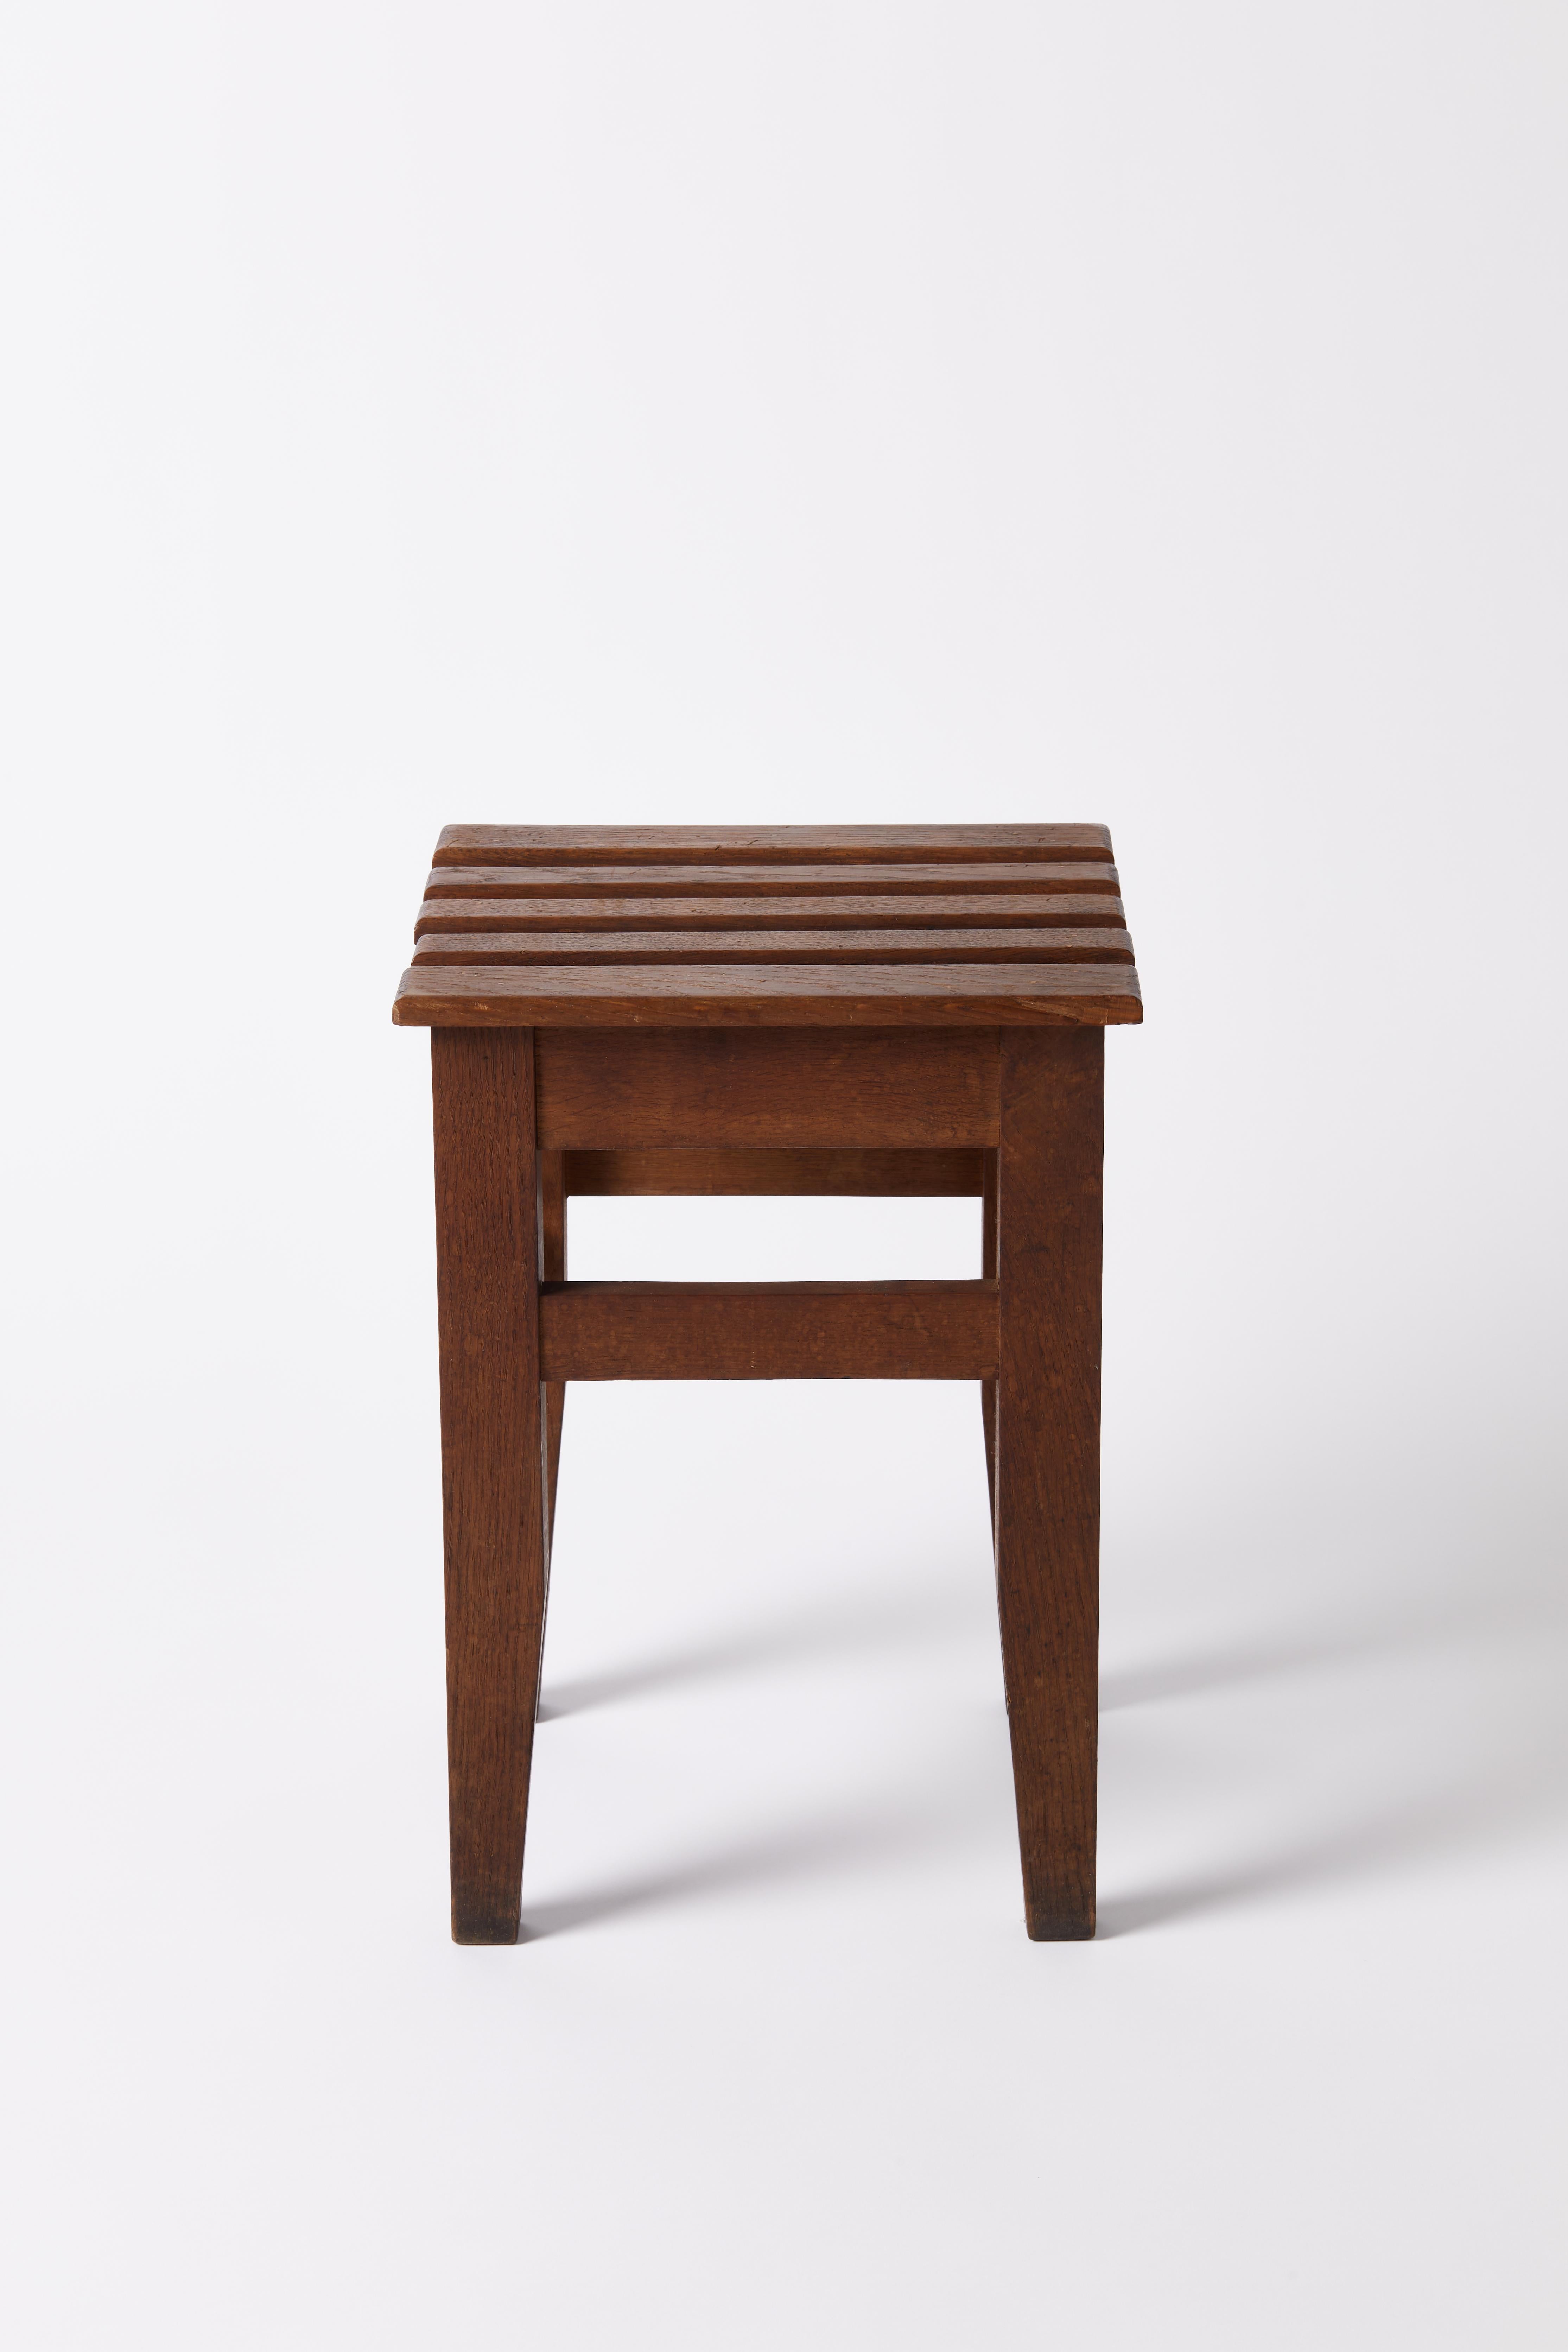 Small wooden stool with tapered legs.